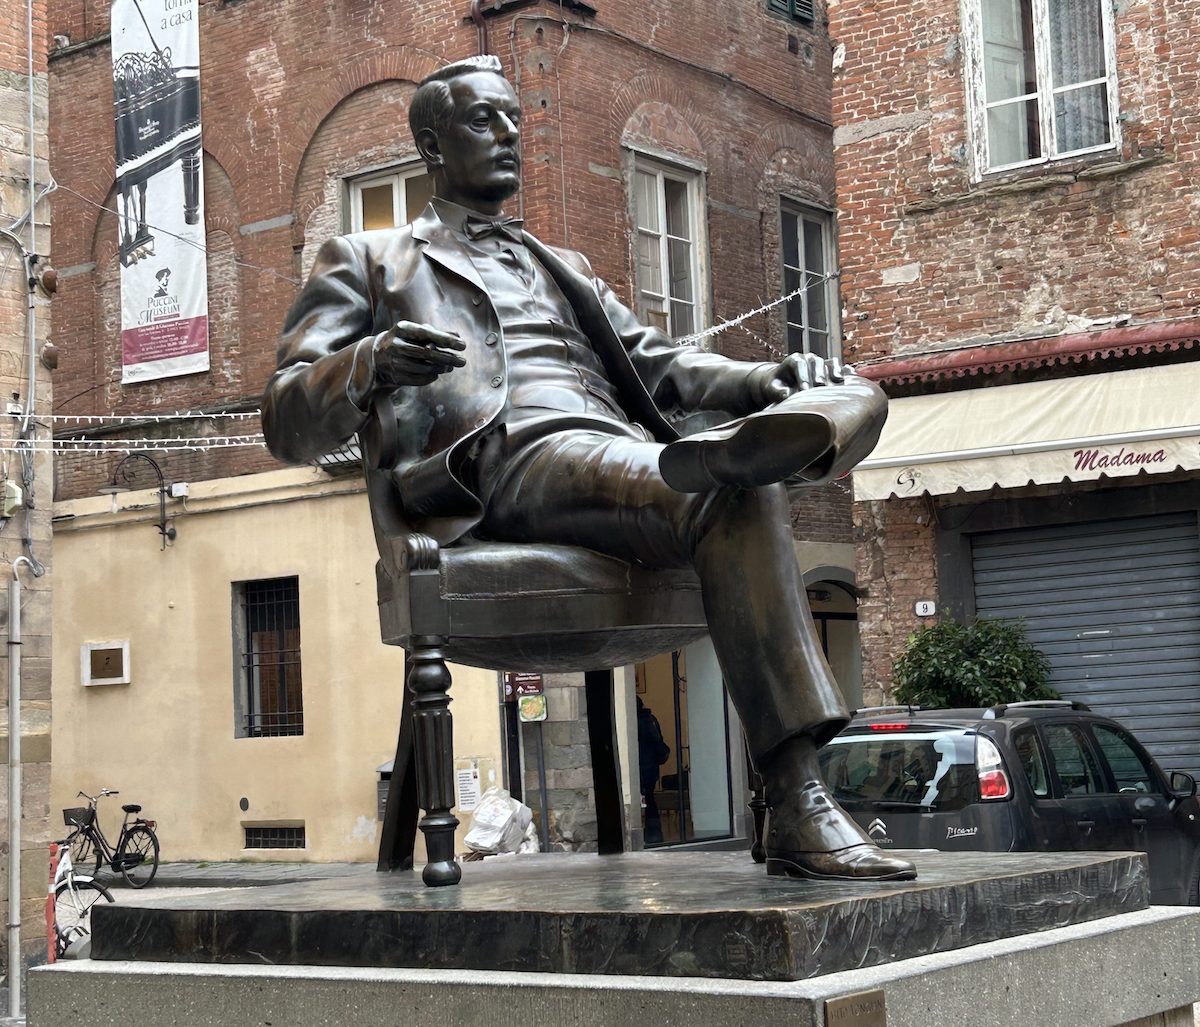 Giacomo Puccini Statue in Lucca, one of many day trips from Florence